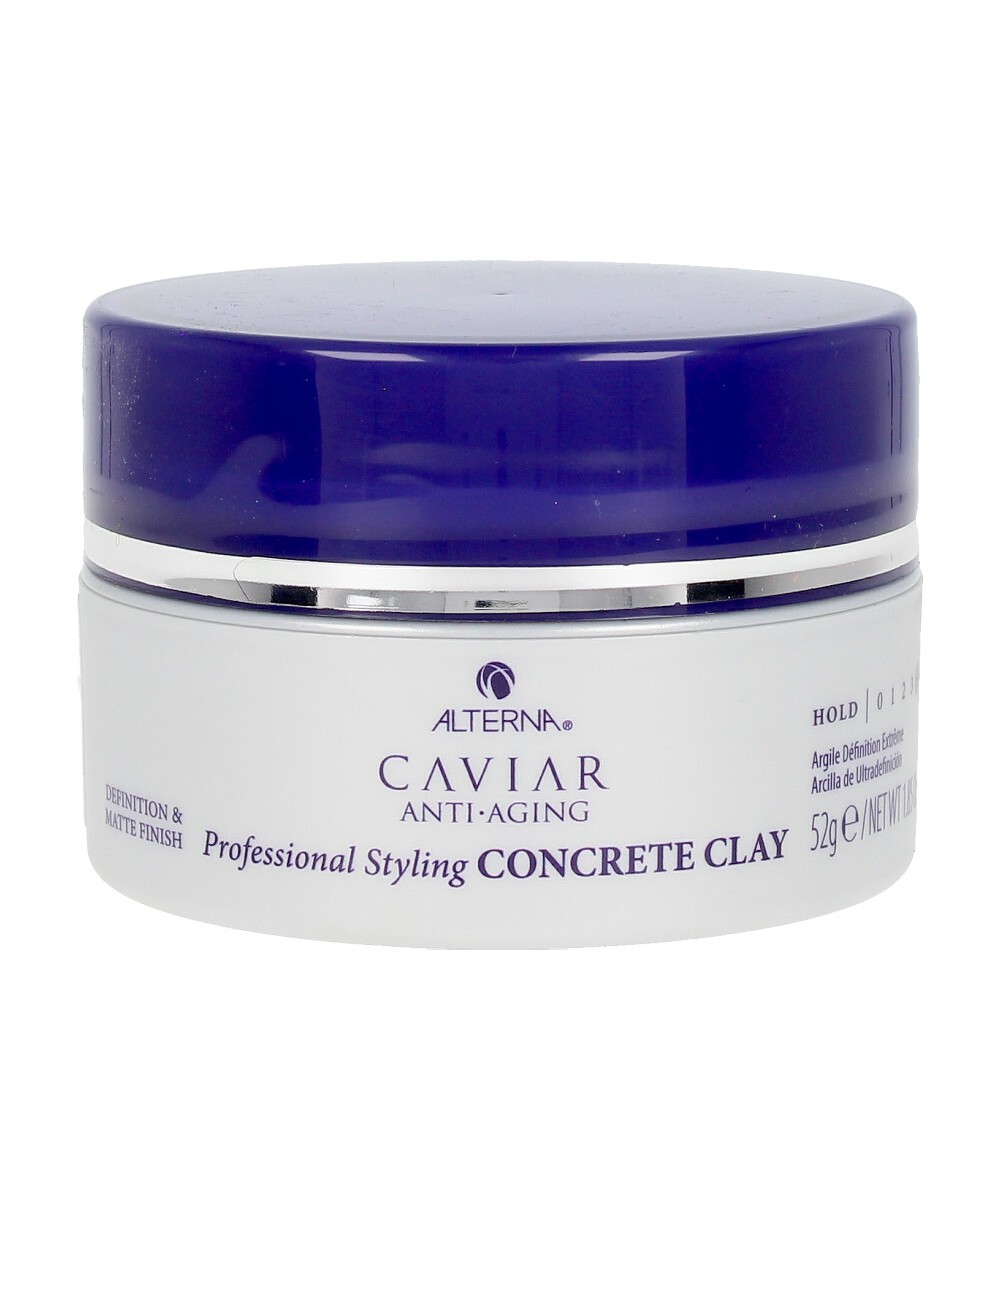 CAVIAR PROFESSIONAL STYLING concrete clay 52 gr